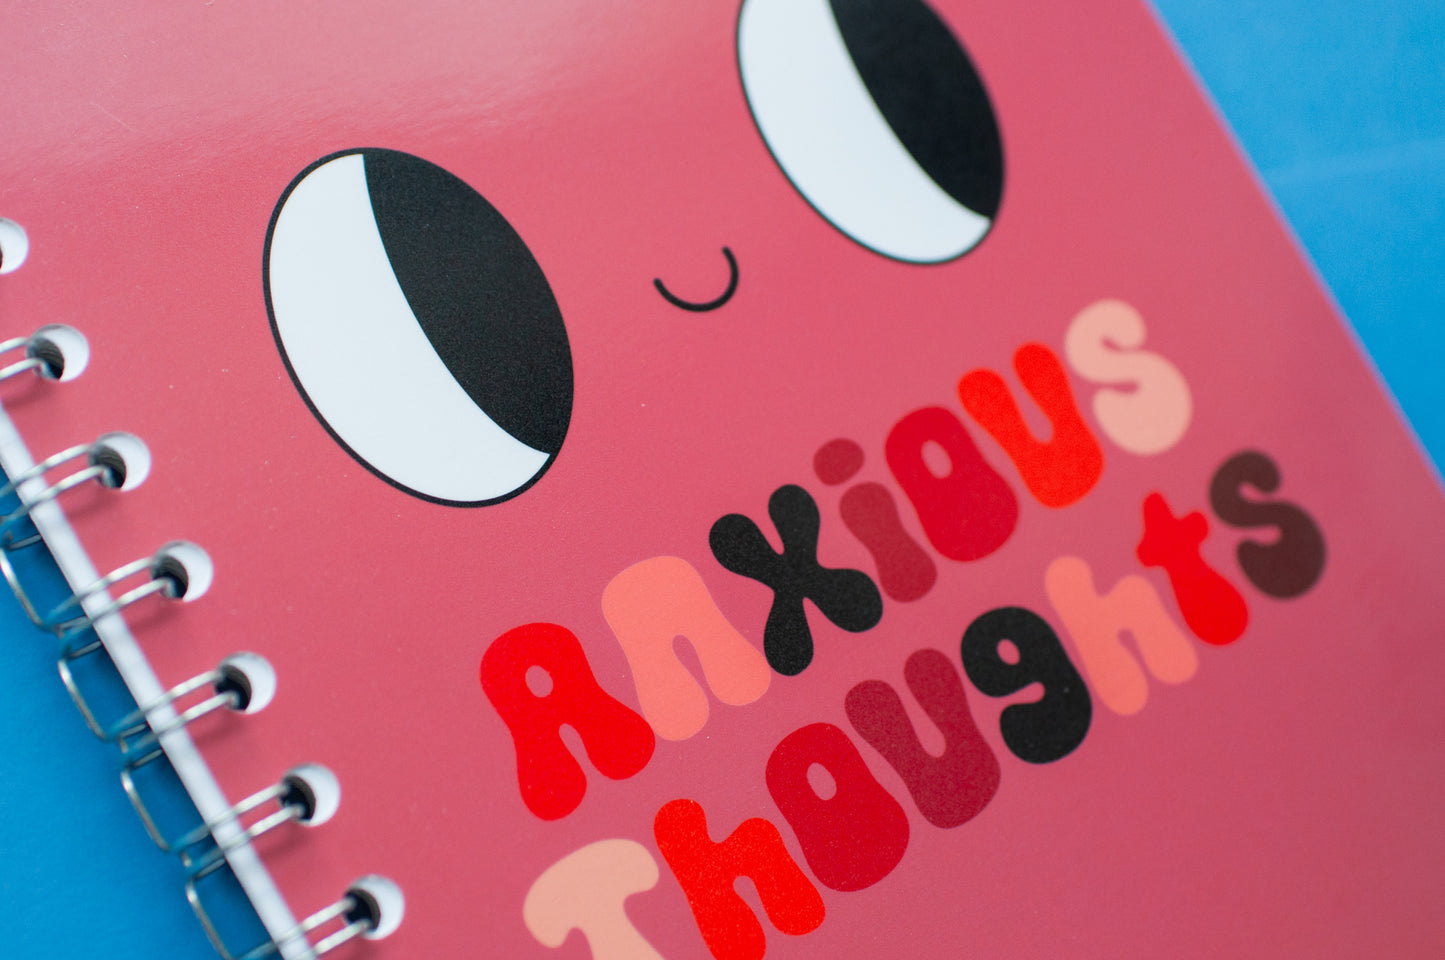 Anxious Thoughts